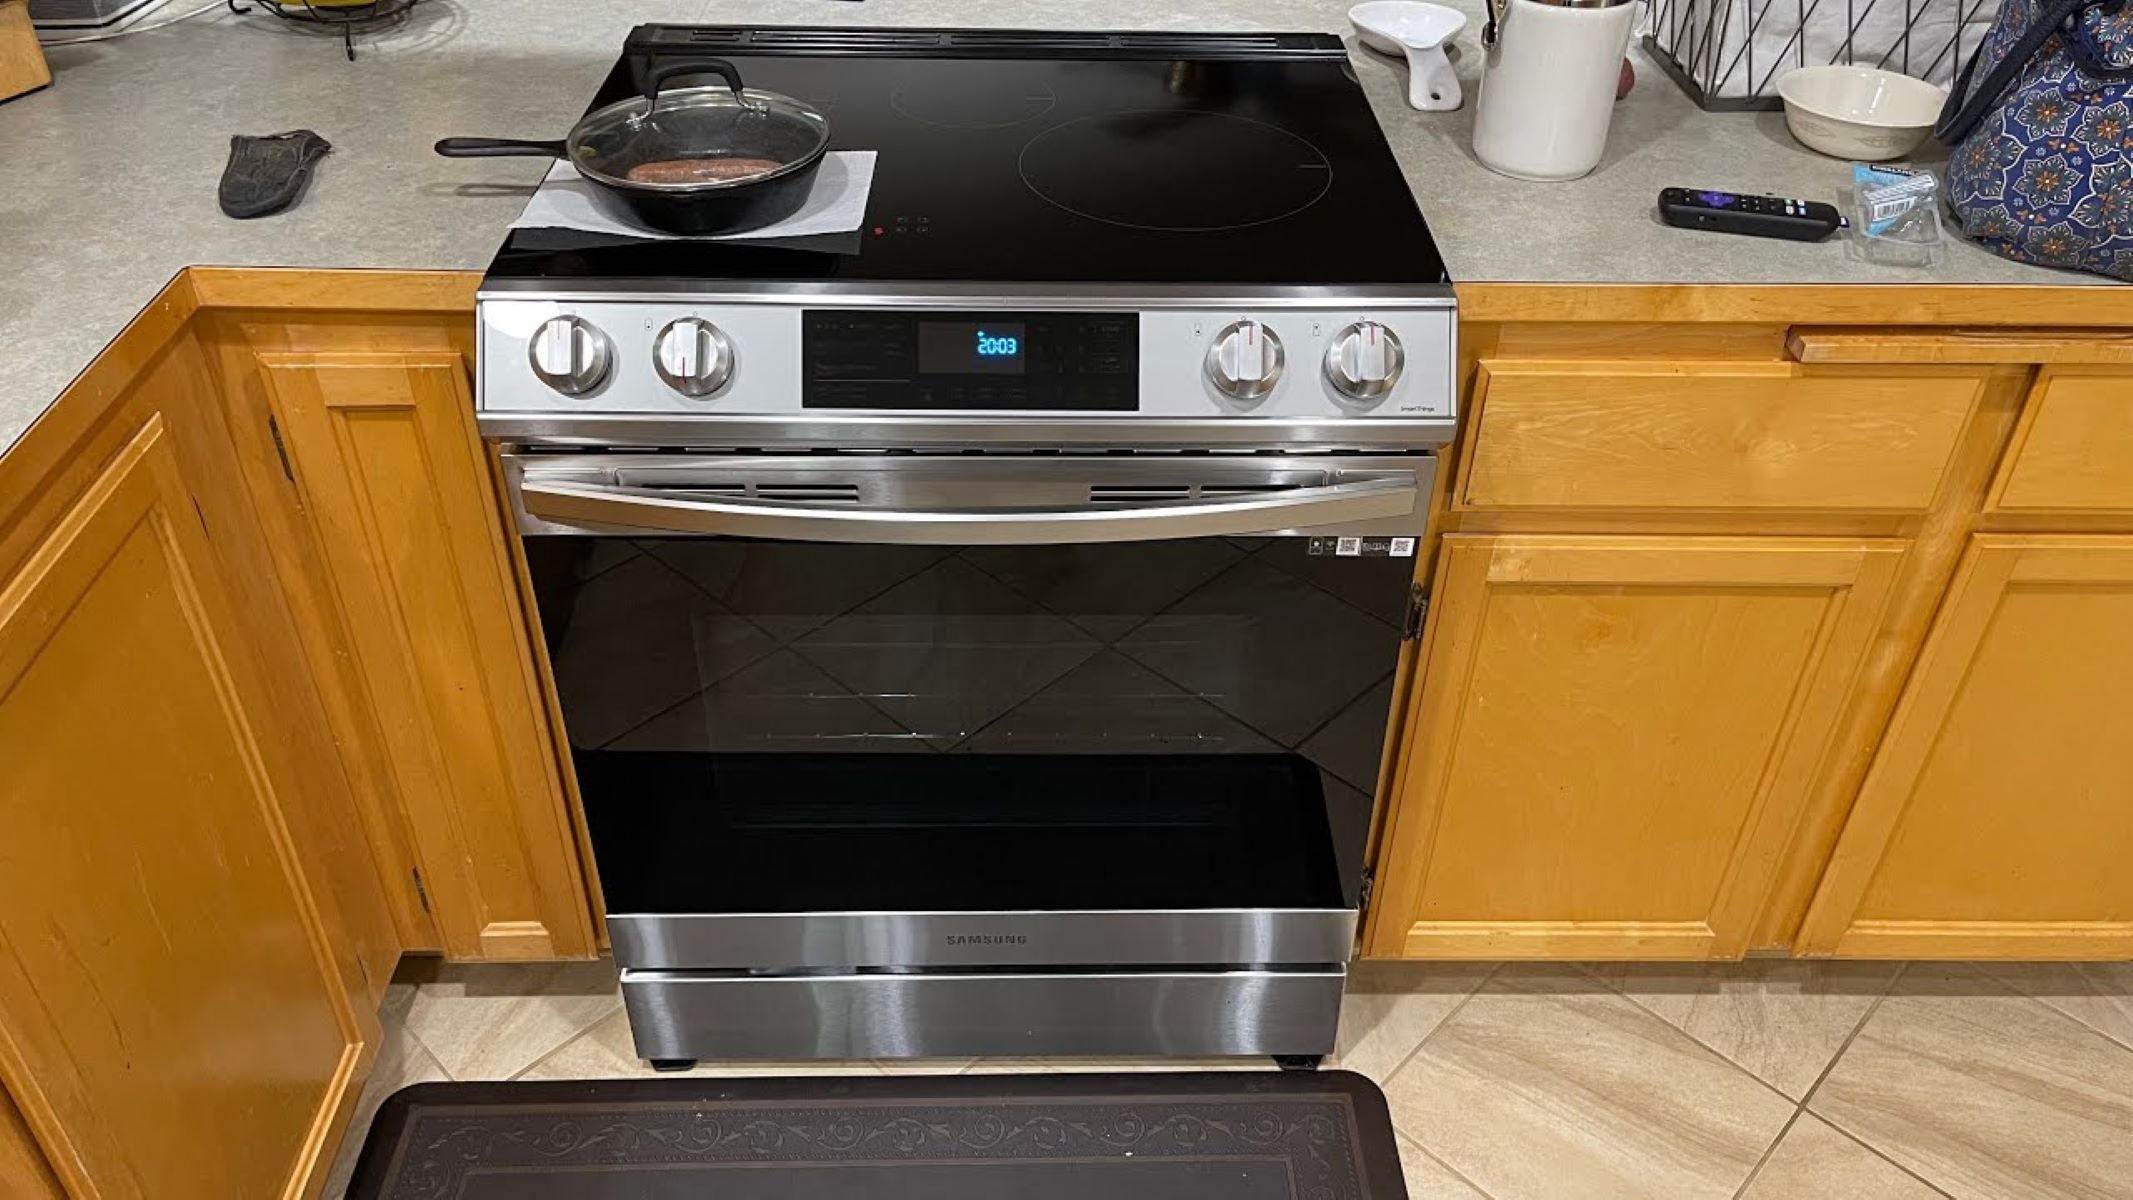 How To Fix The Error Code C-d0 For Samsung Induction Range